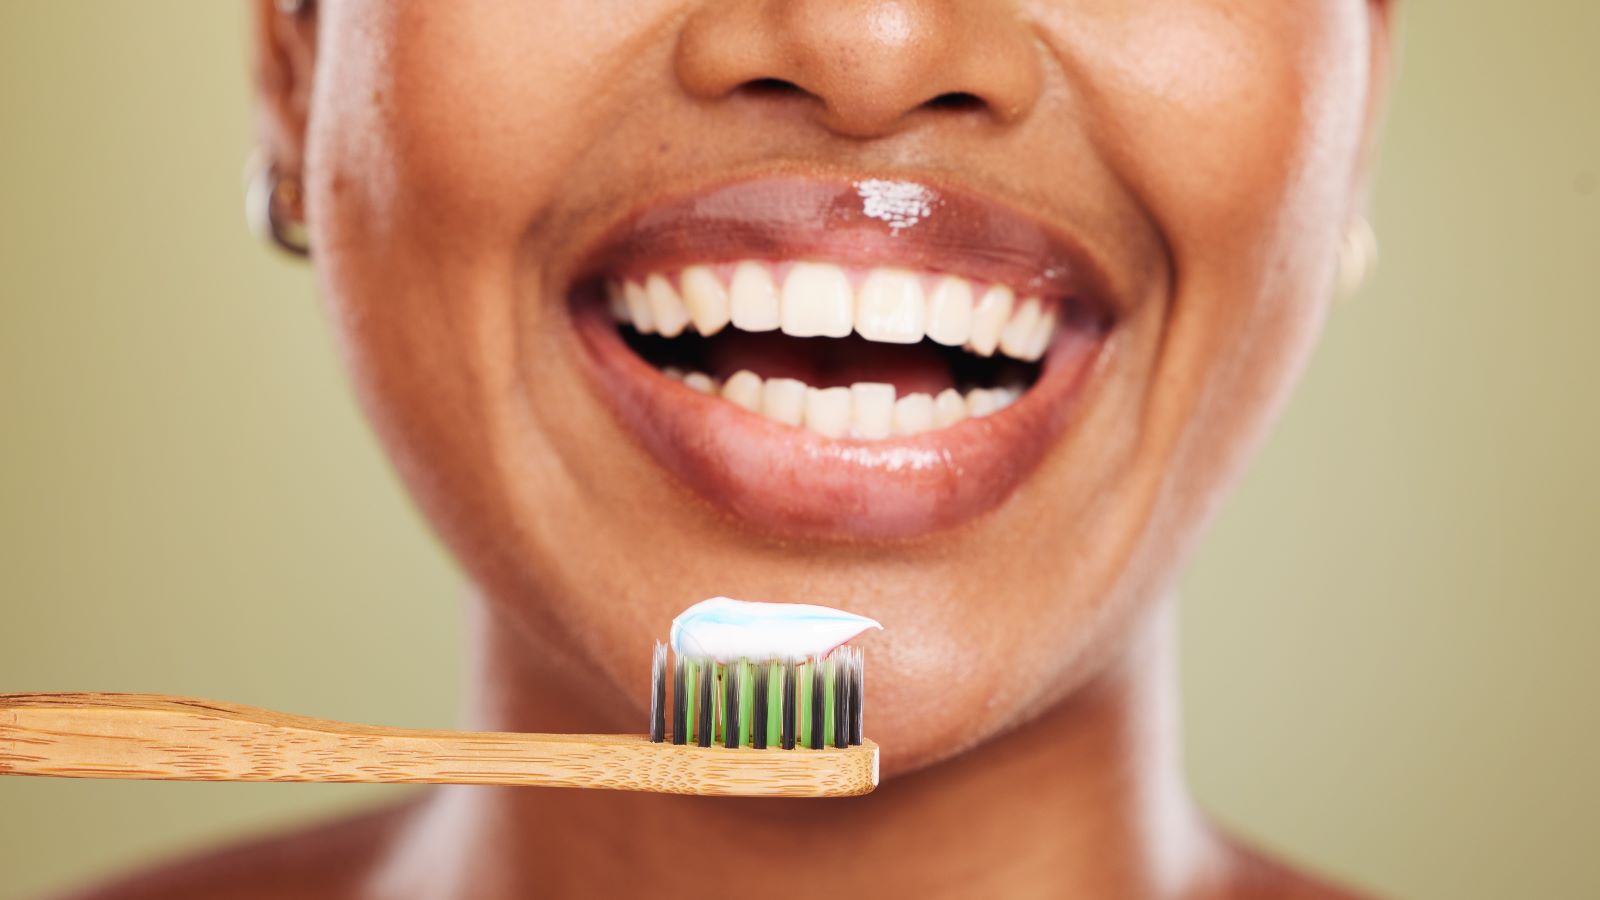 There may actually be a link between poor oral hygiene and your risk of developing cancer in the mouth or the throat.